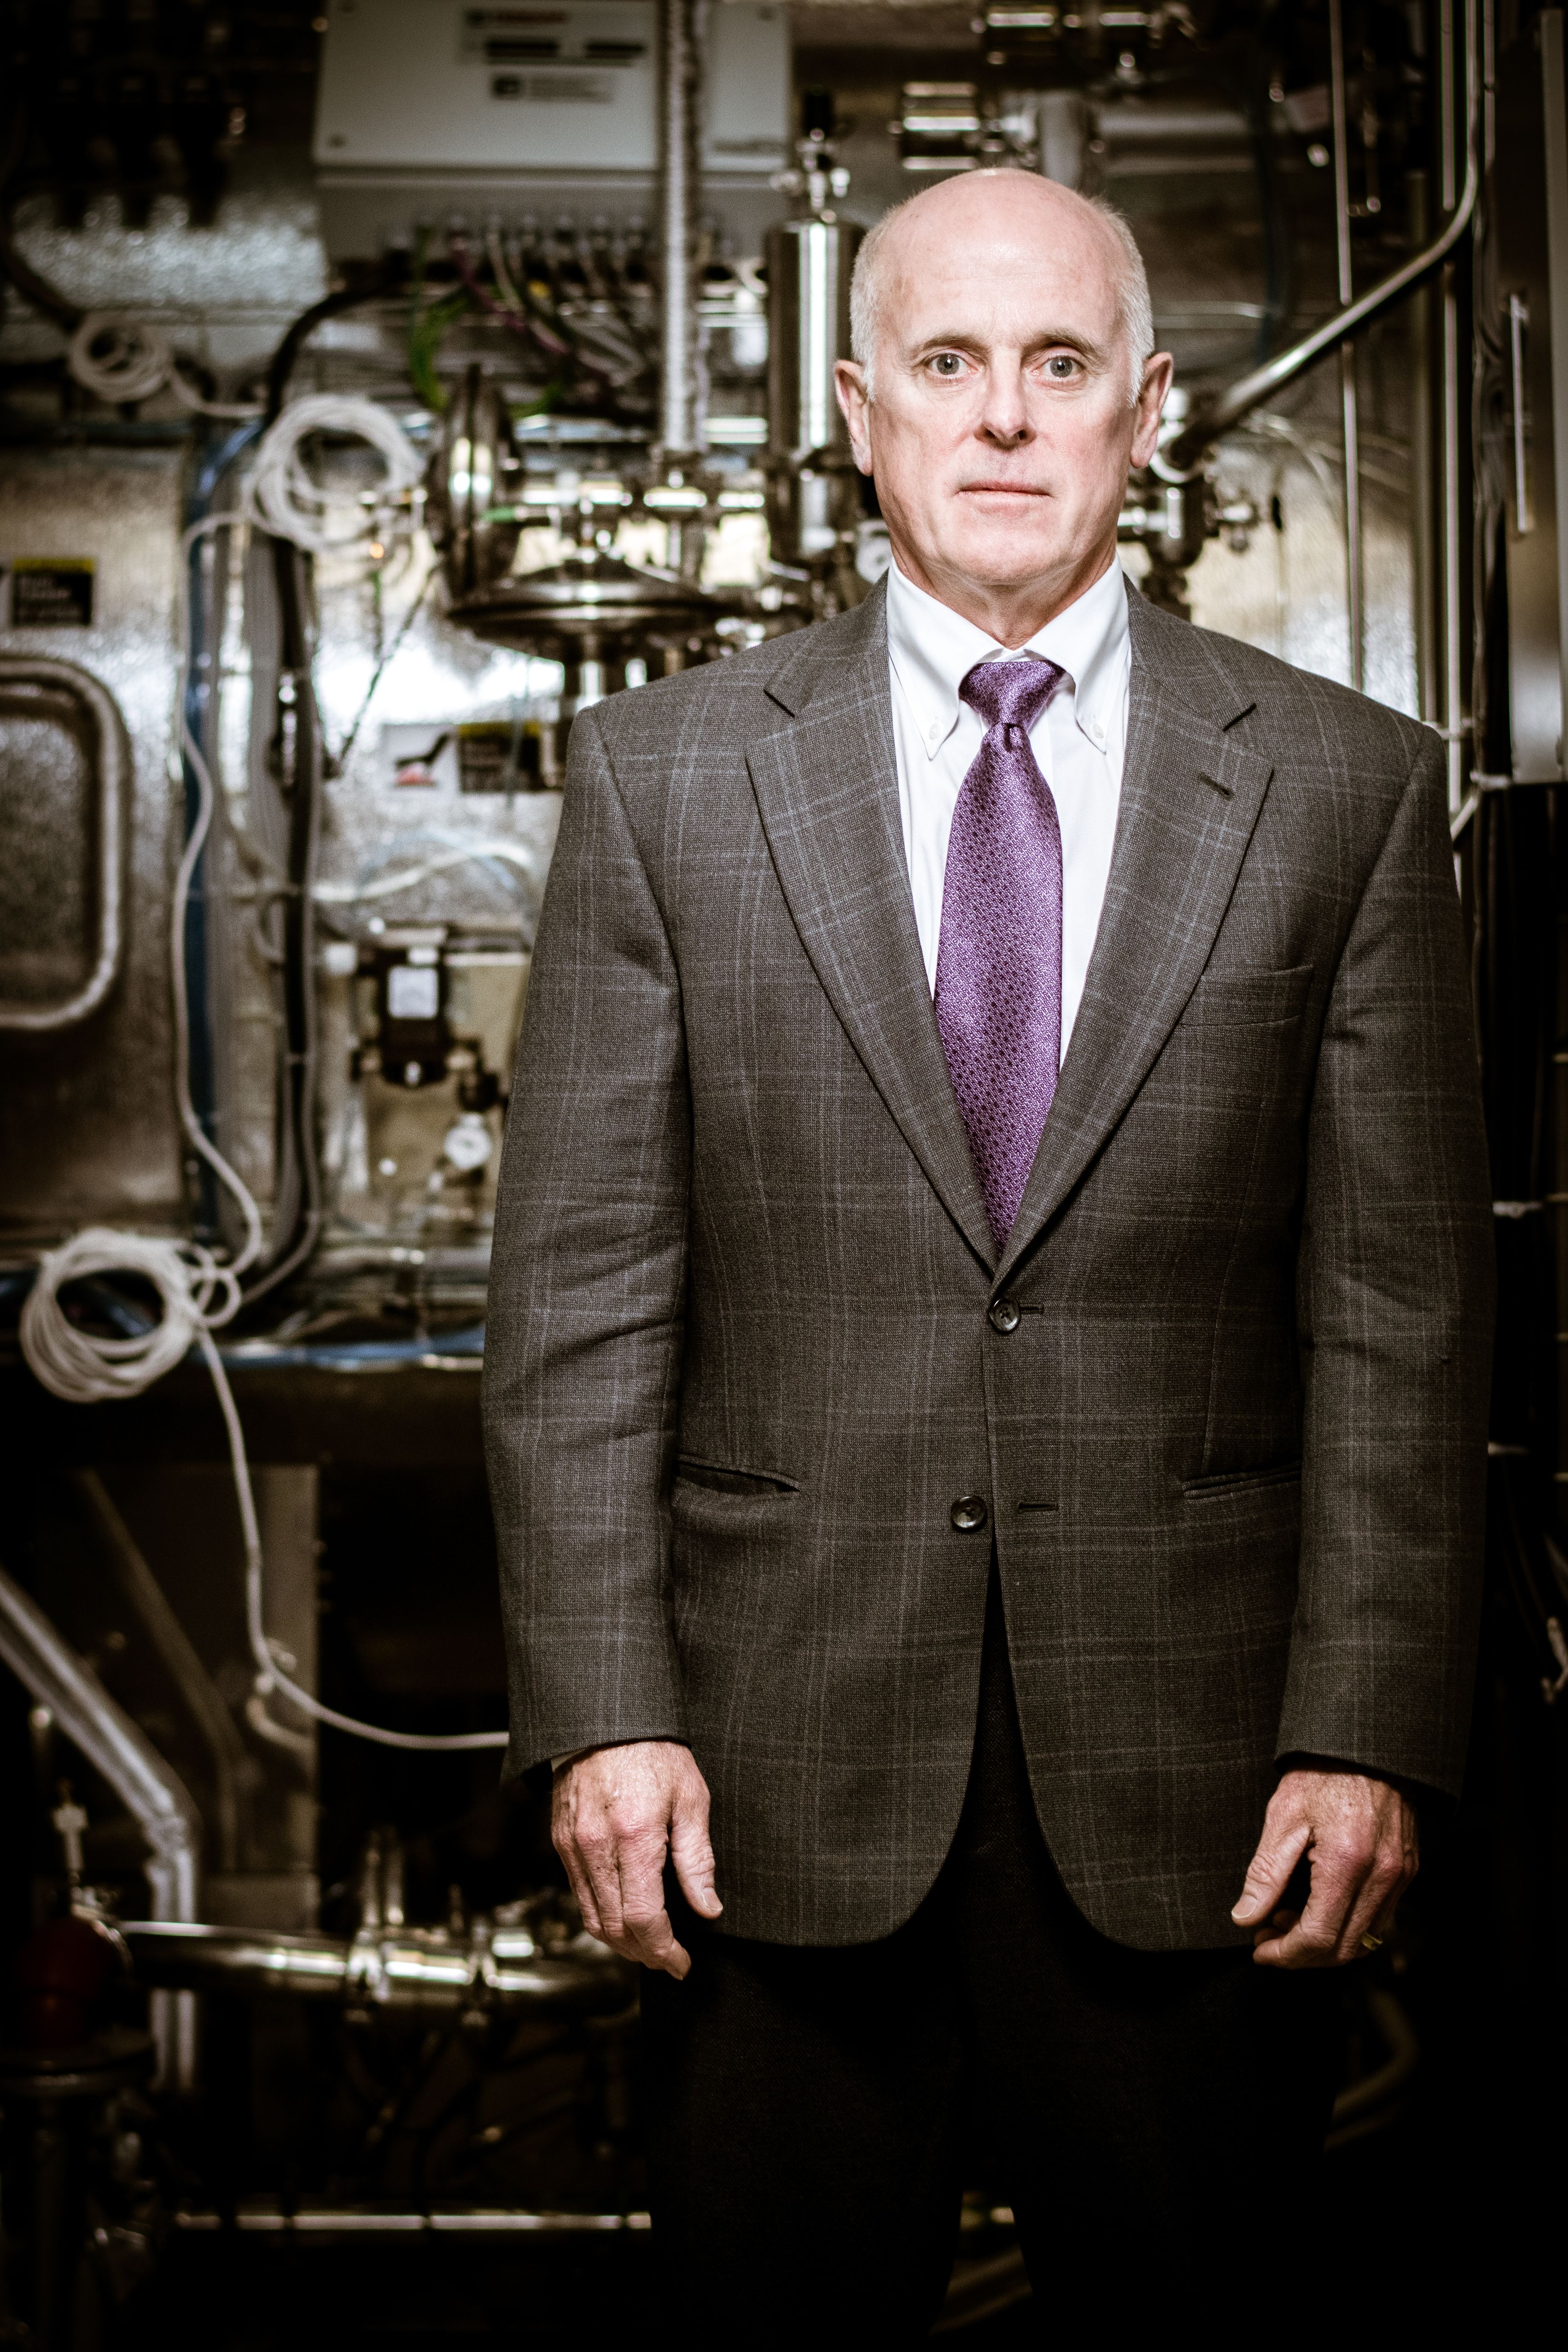 Portrait of male executive in suit with purple tie standing in front of industrial machinery